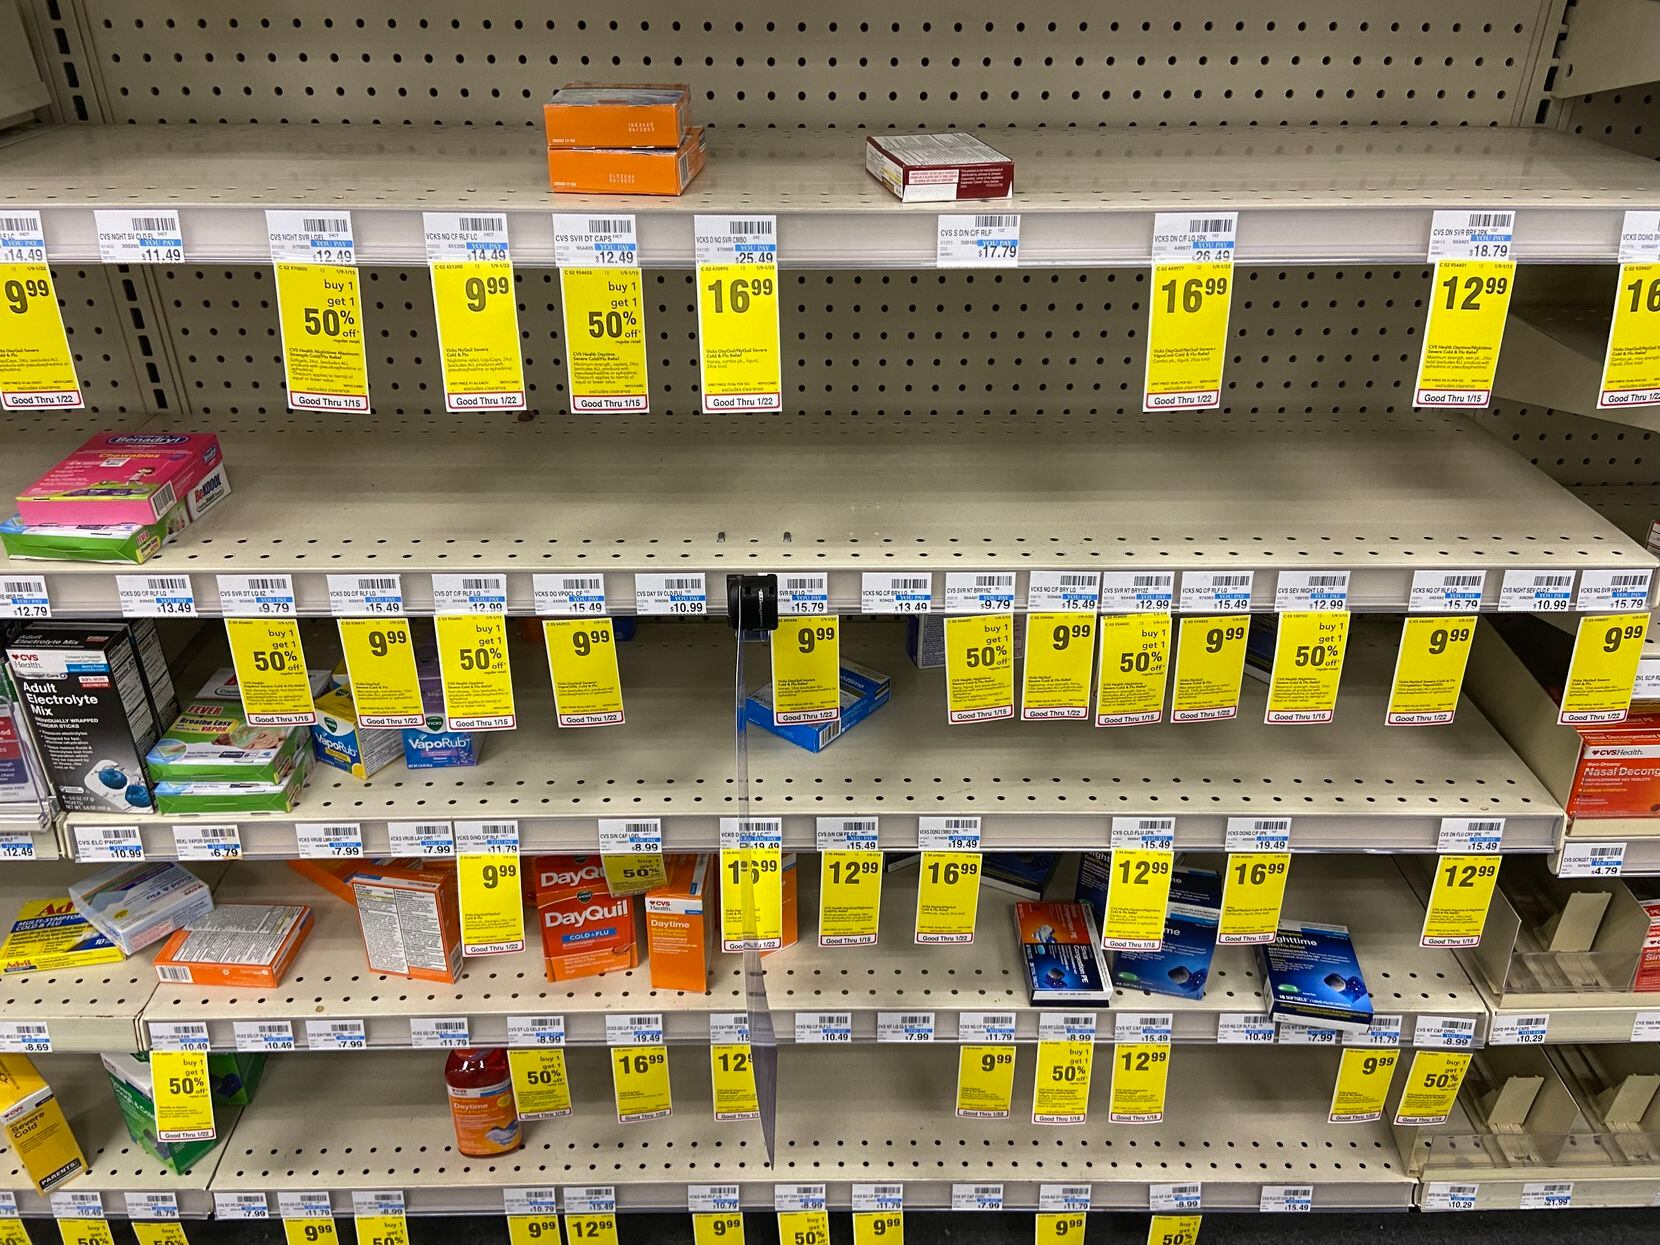 The cold remedy aisle at a CVS on Forest Lane in Dallas on Monday. The store is offering discounts on products it can't keep in stock.